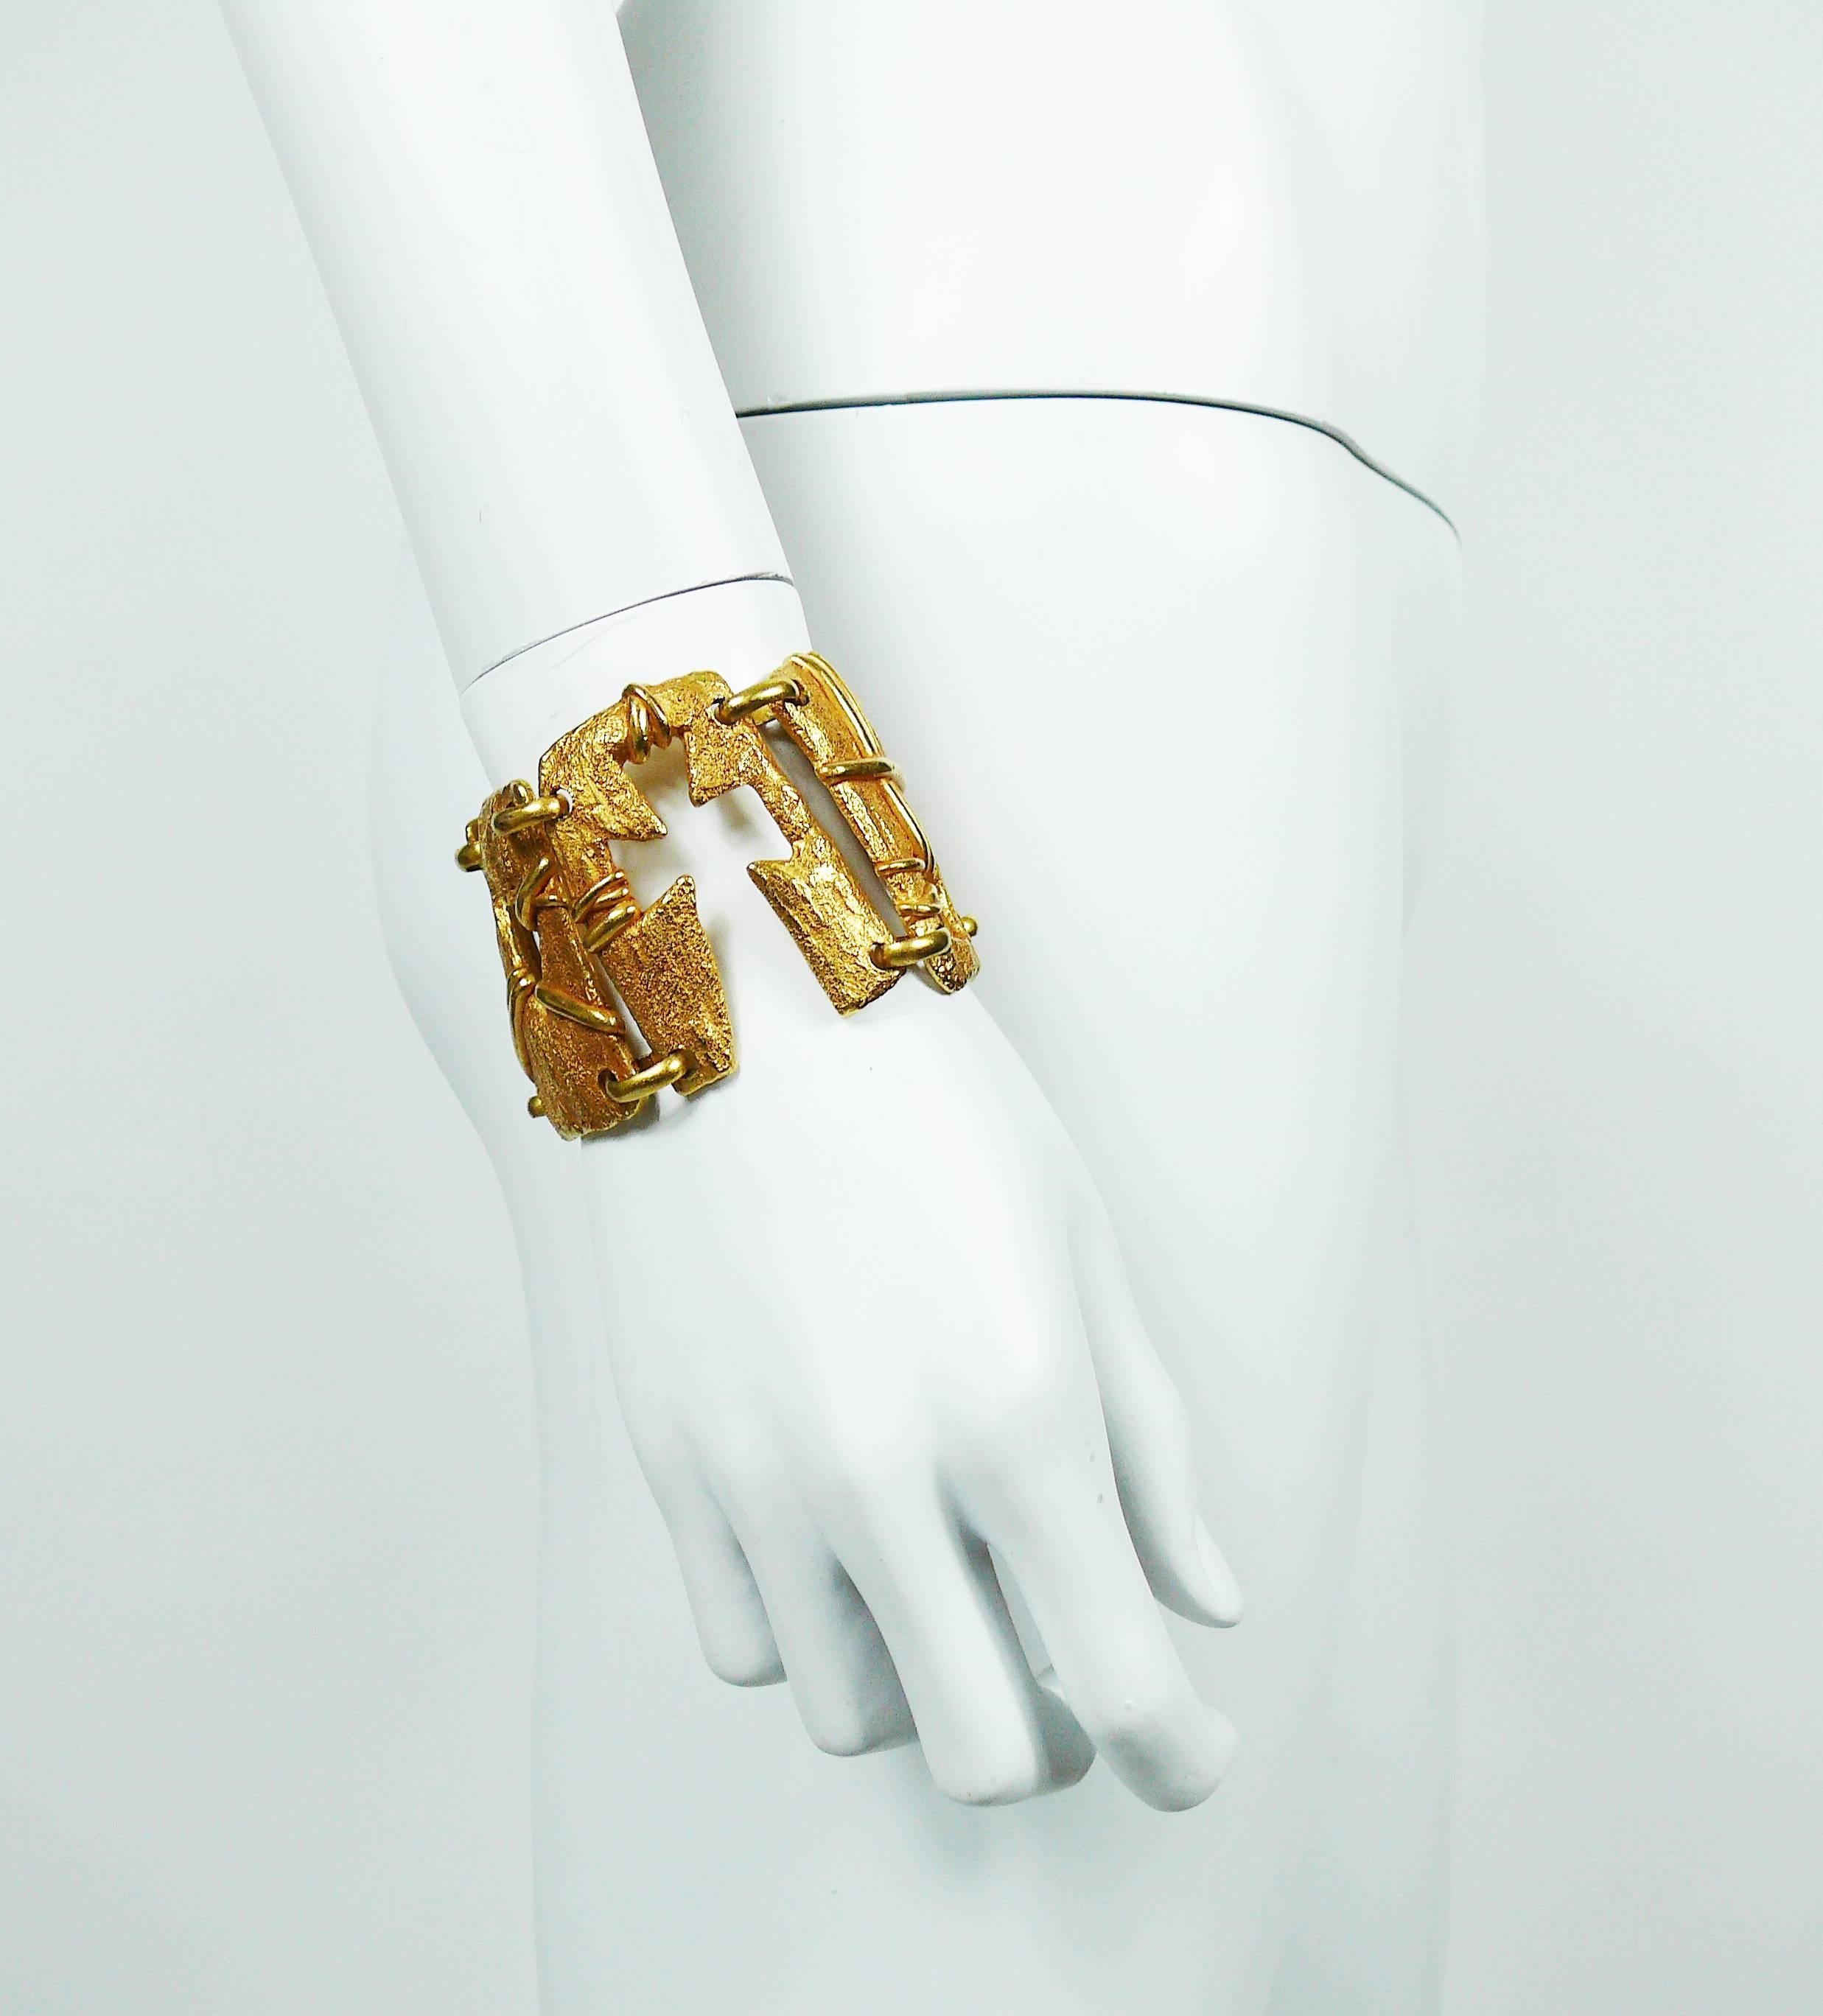 CHRISTIAN LACROIX vintage gold tone textured articulated cut out cuff bracelet.

Marked CHRISTIAN LACROIX E94 Made in France.

Indicative measurements : length approx. 17.5 cm (6.89 inches) / width approx. 4.9 cm (1.93 inches).

JEWELRY CONDITION